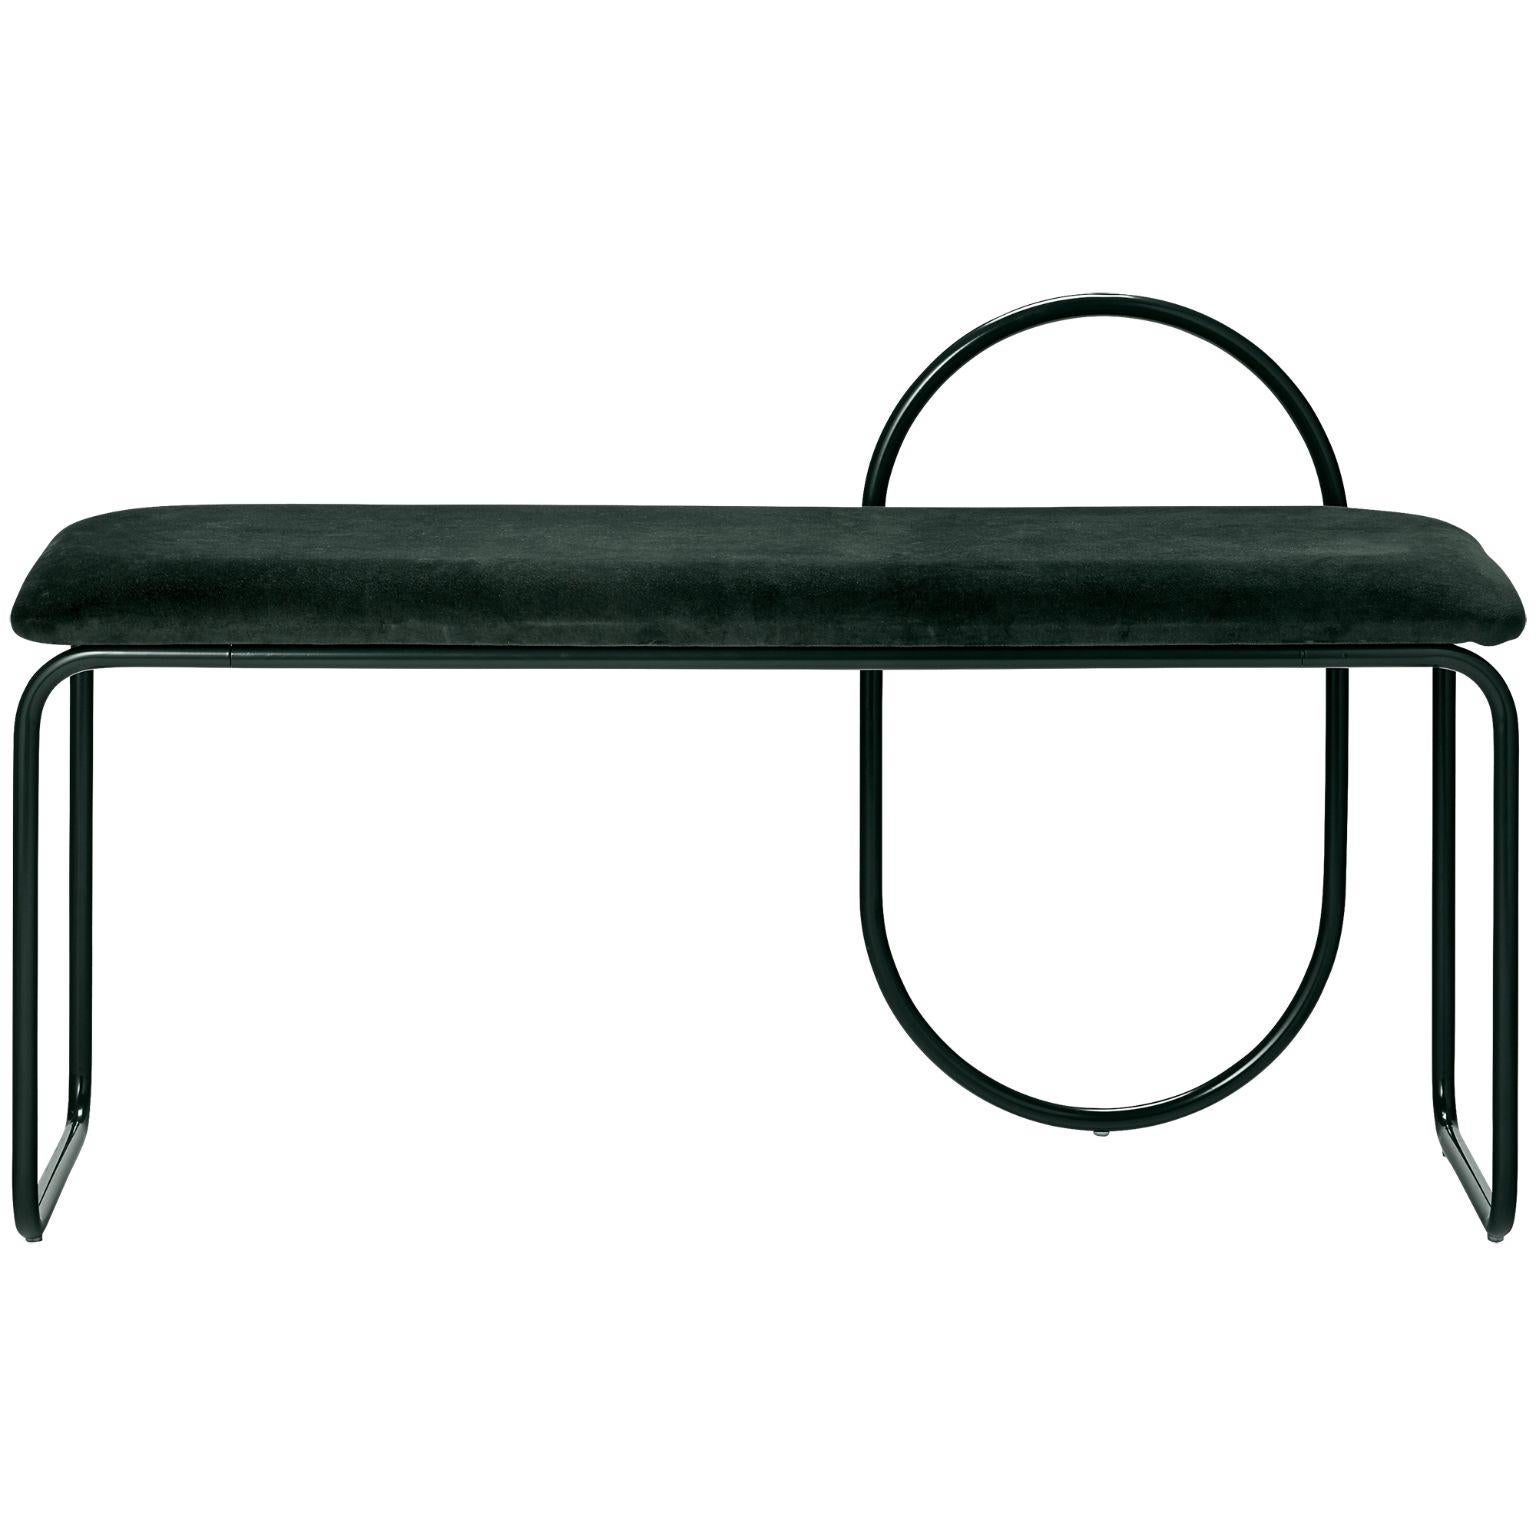 Forest velvet Minimalist bench 
Dimensions: L 110 x W 39 x H 68 CM
Materials: Cotton velvet, steel

The collection includes benches, chairs, shelves and mirrors in a wide variety of sizes.